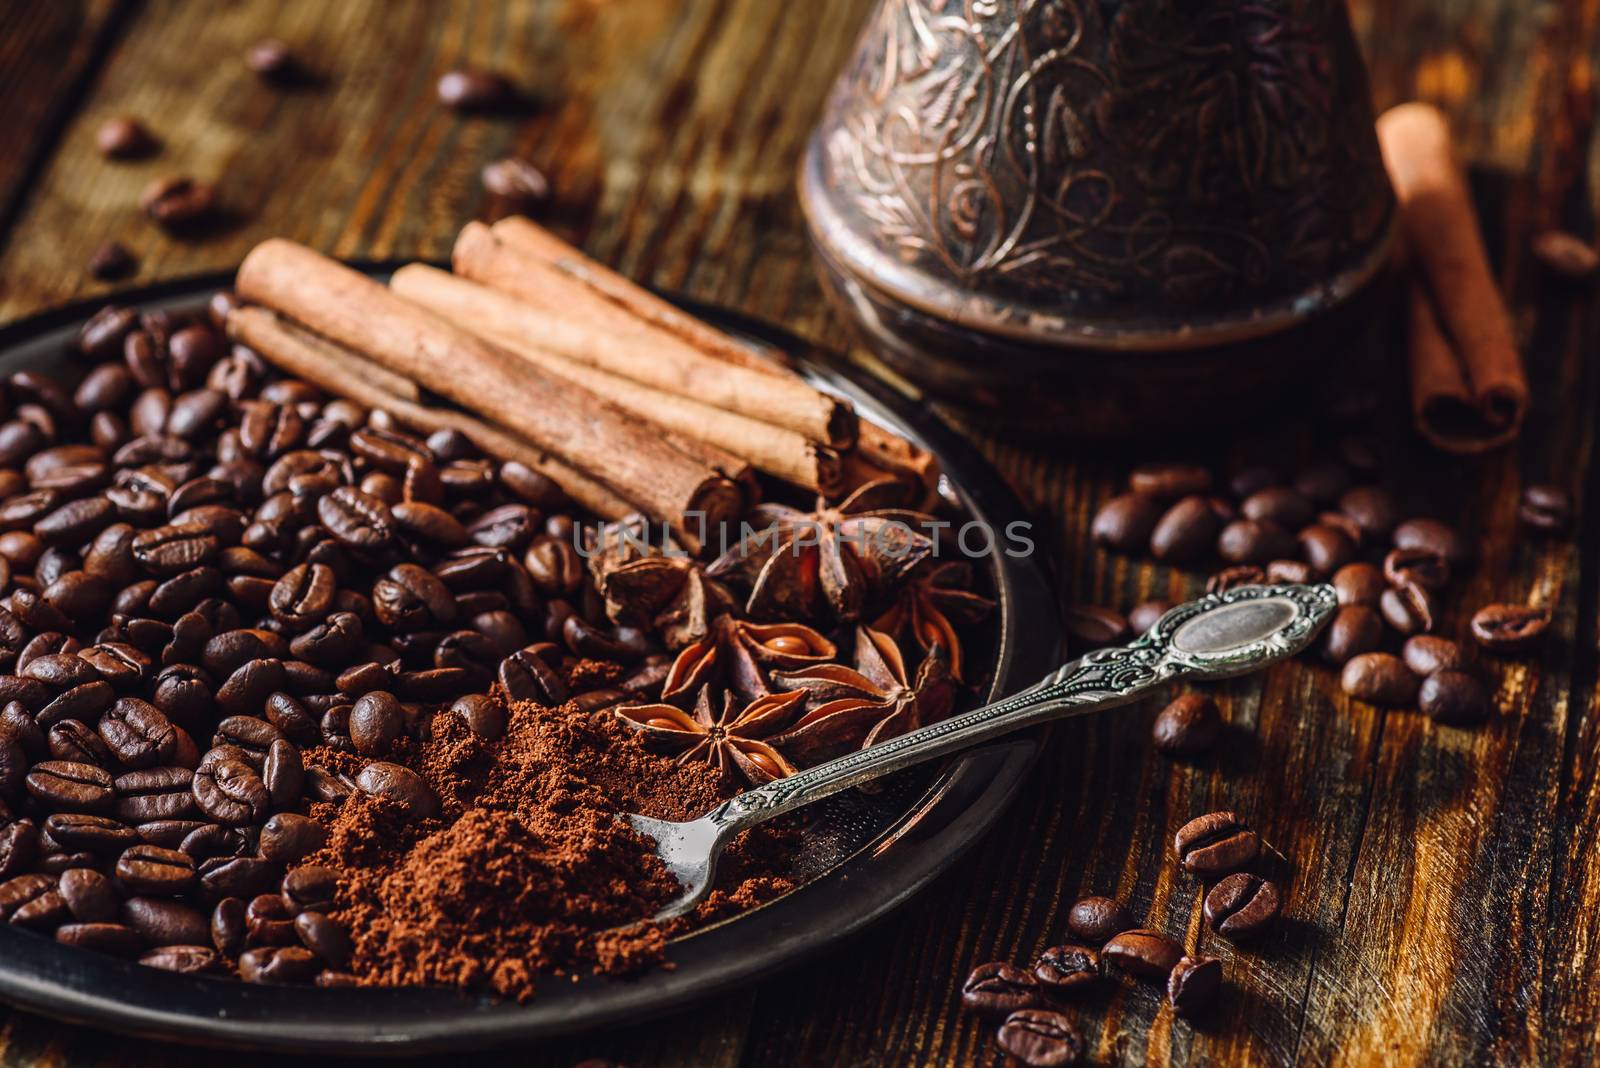 Coffee with Spices. by Seva_blsv